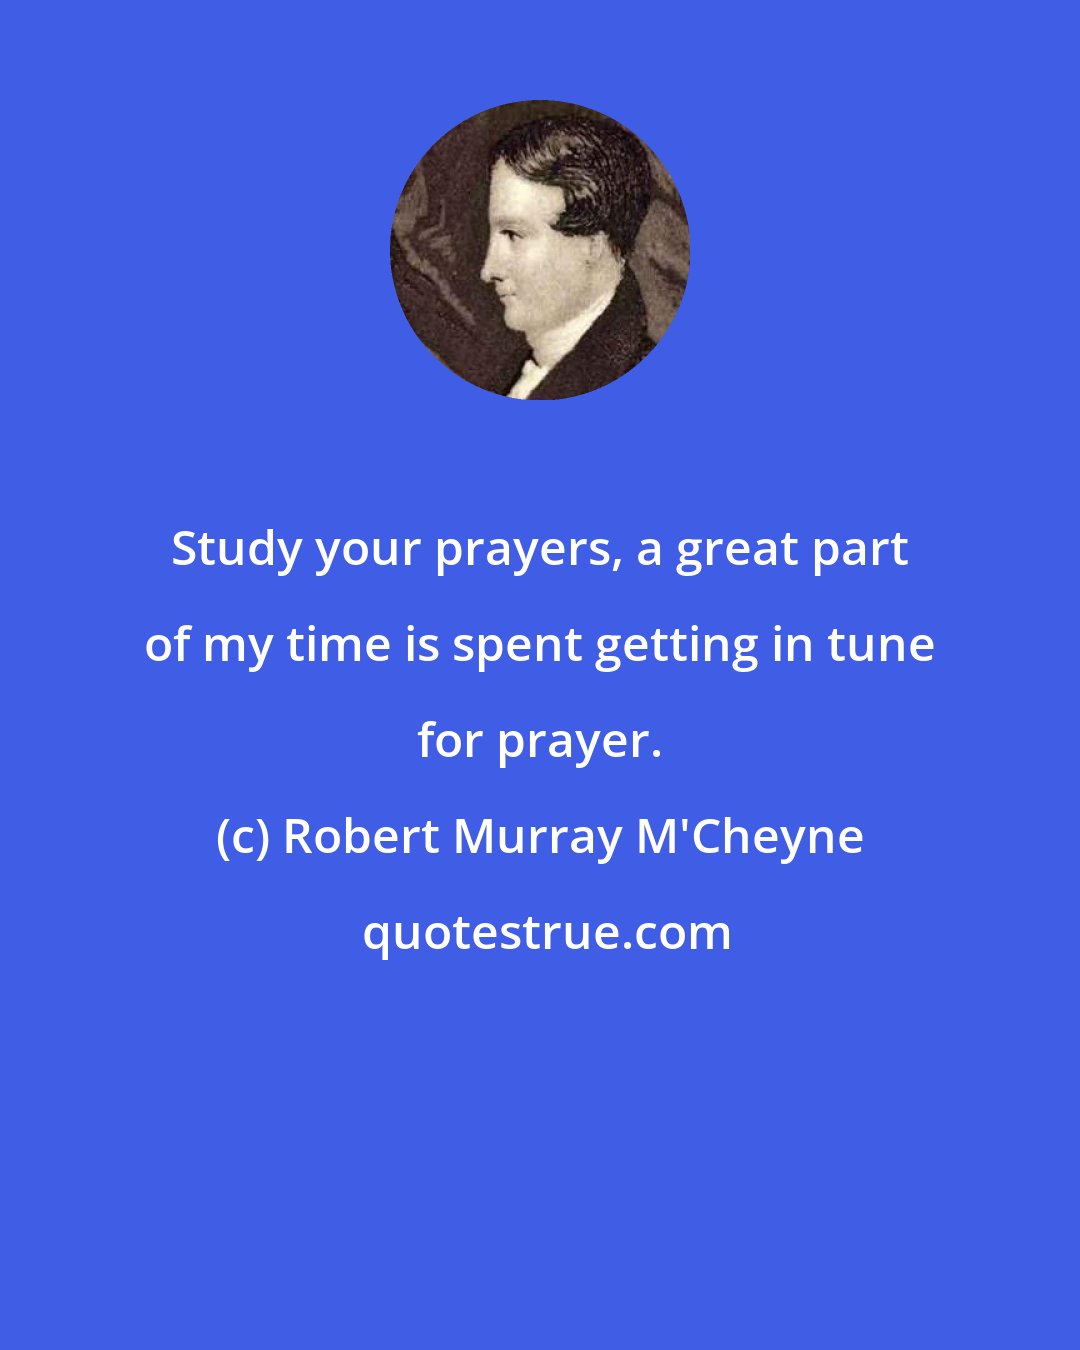 Robert Murray M'Cheyne: Study your prayers, a great part of my time is spent getting in tune for prayer.